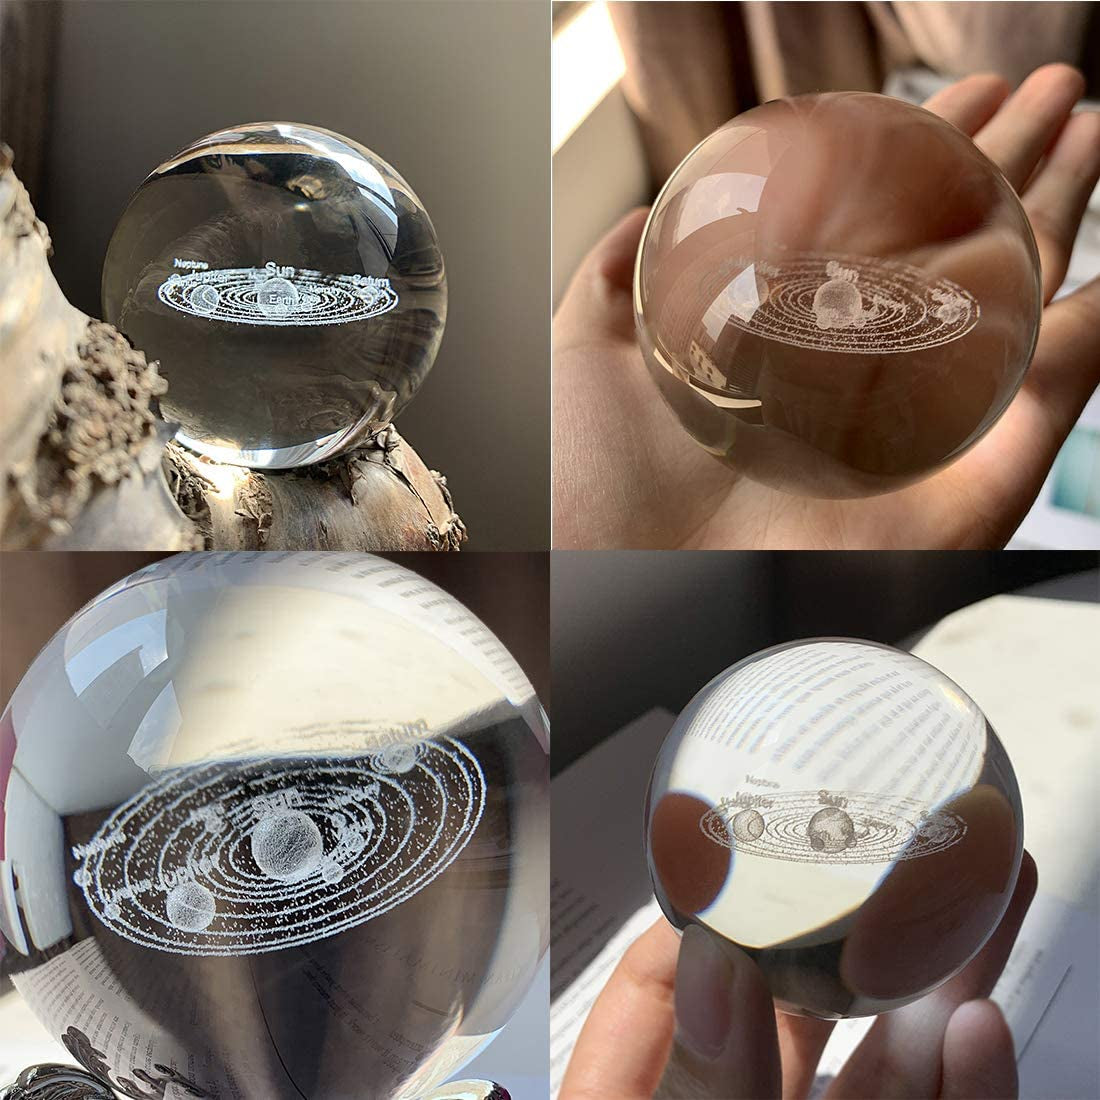 Crystal 2.4 Inch (60Mm) Solar System Crystal Ball with Sliver-Plated Flowering Stand,Fengshui Glass Ball Home Decoration